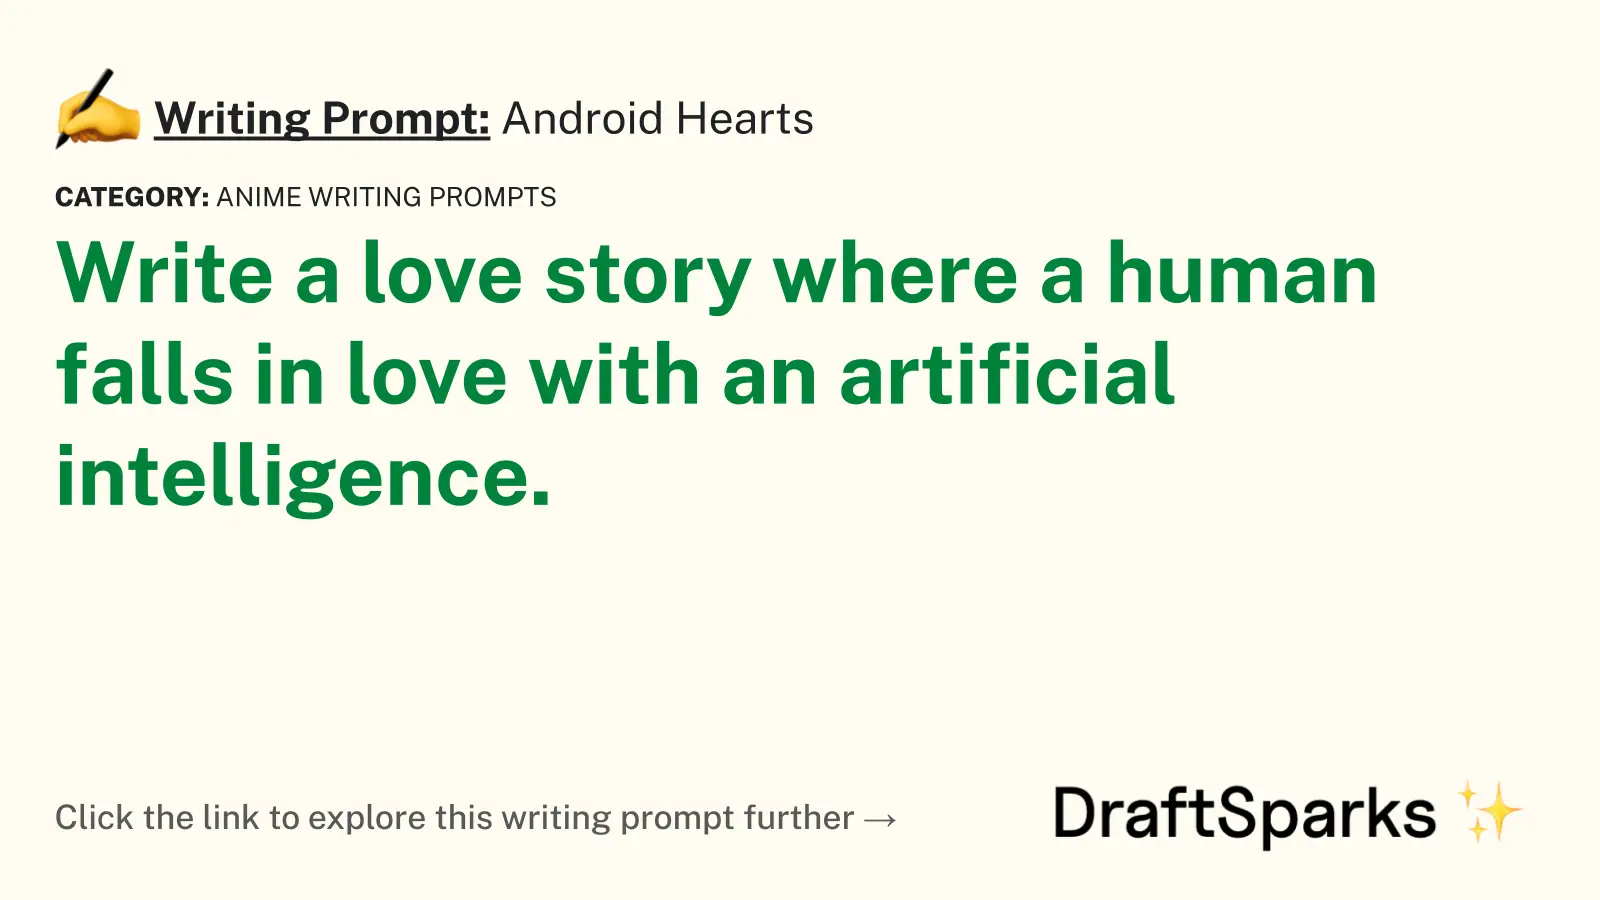 Android Hearts